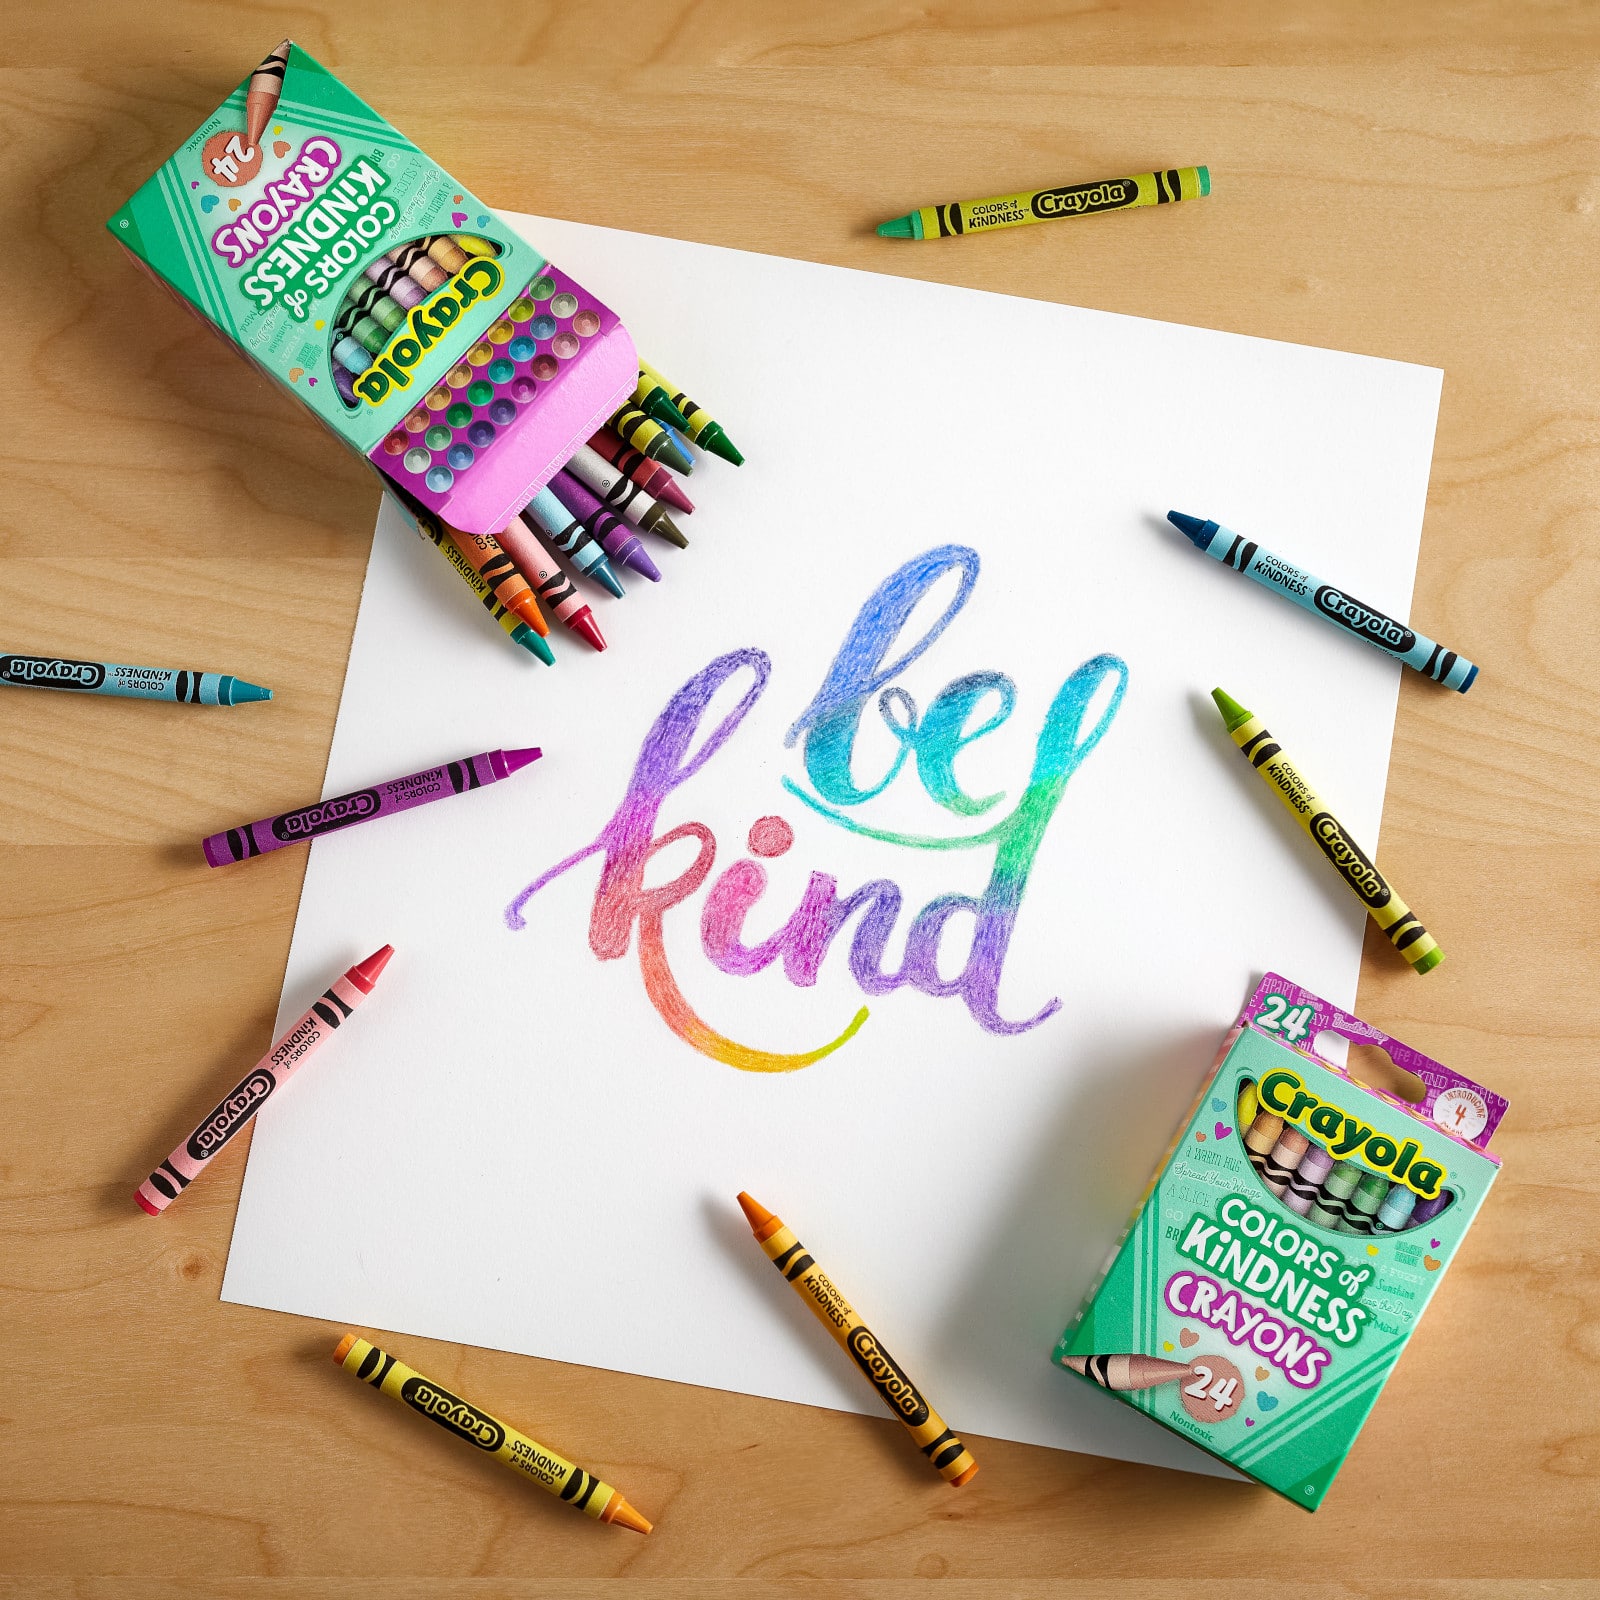 Colors of Kindness Crayons, 24 Per Pack, 12 Packs